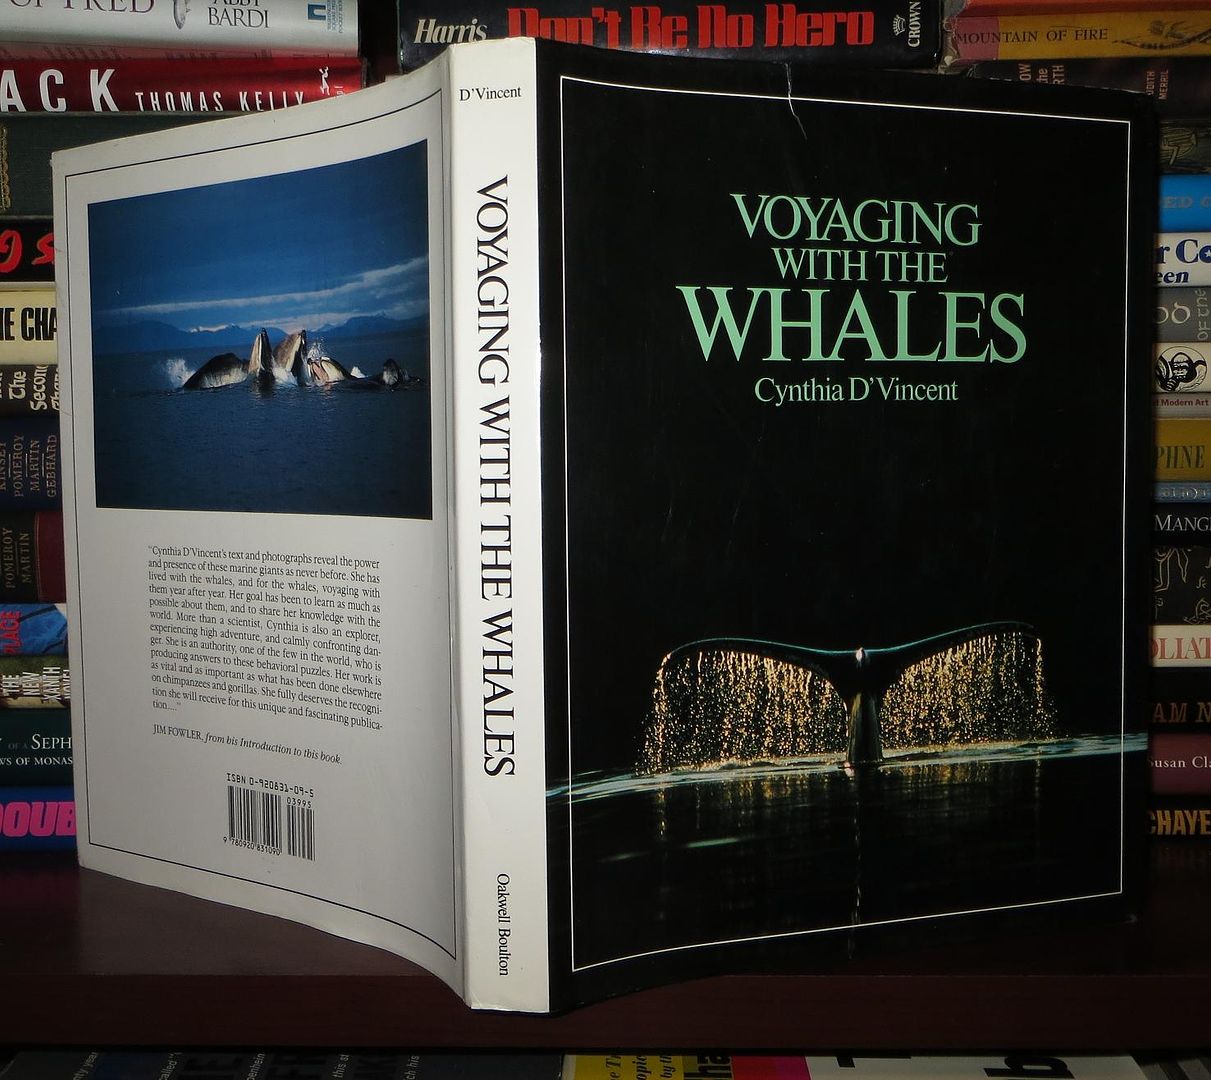 D'VINCENT, CYNTHIA & DELPHINE HALEY & FRED A. SHARPE - Voyaging with the Whales